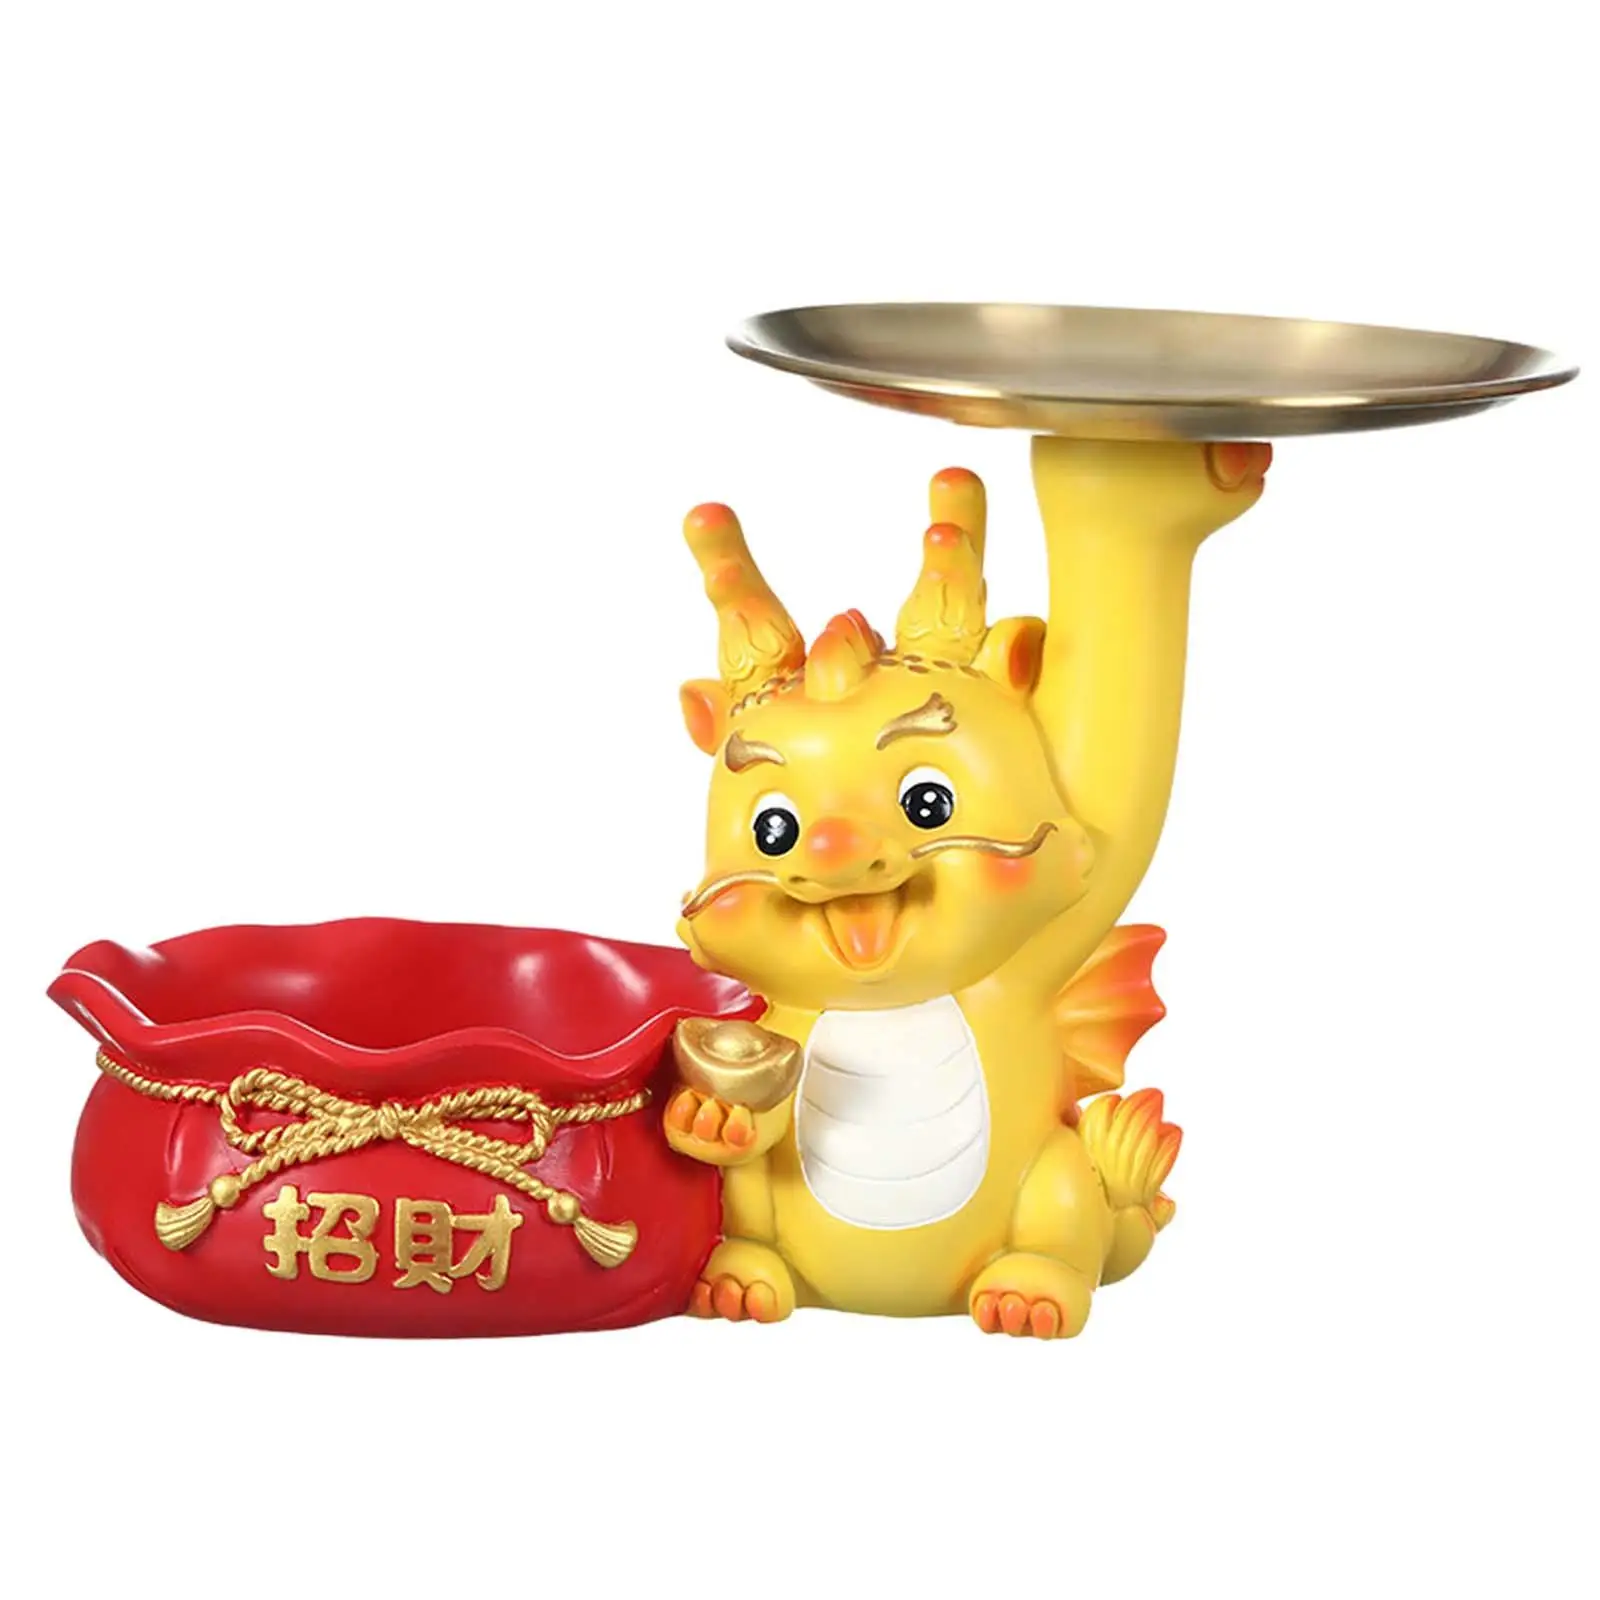 Chinese New Year Dragon Figurine Tray Ornament for Cabinet Bedroom Bookshelf